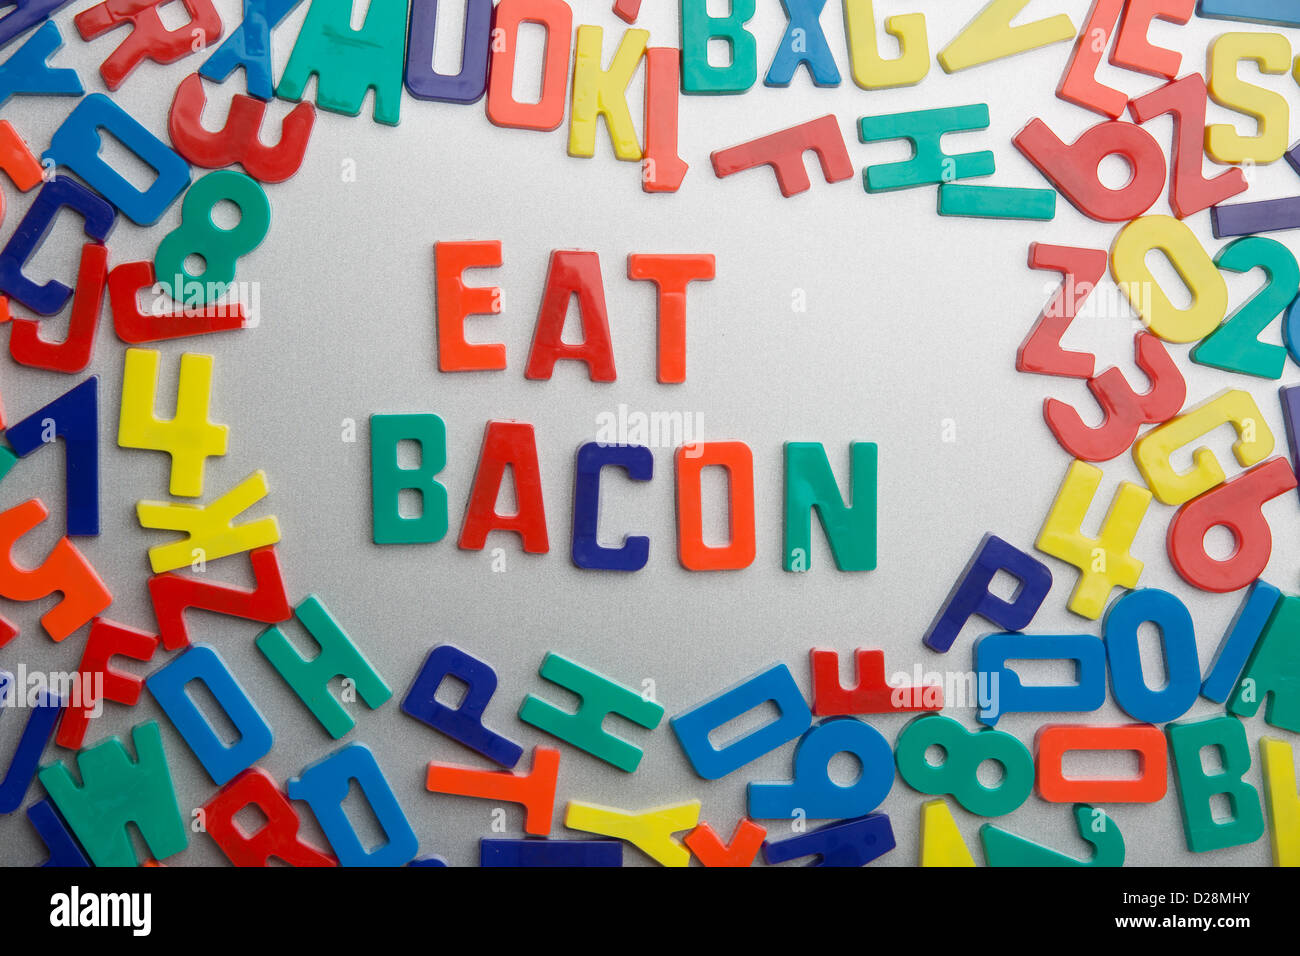 'Eat Bacon' - Refrigerator magnets spell a message out of a jumble of letters Stock Photo